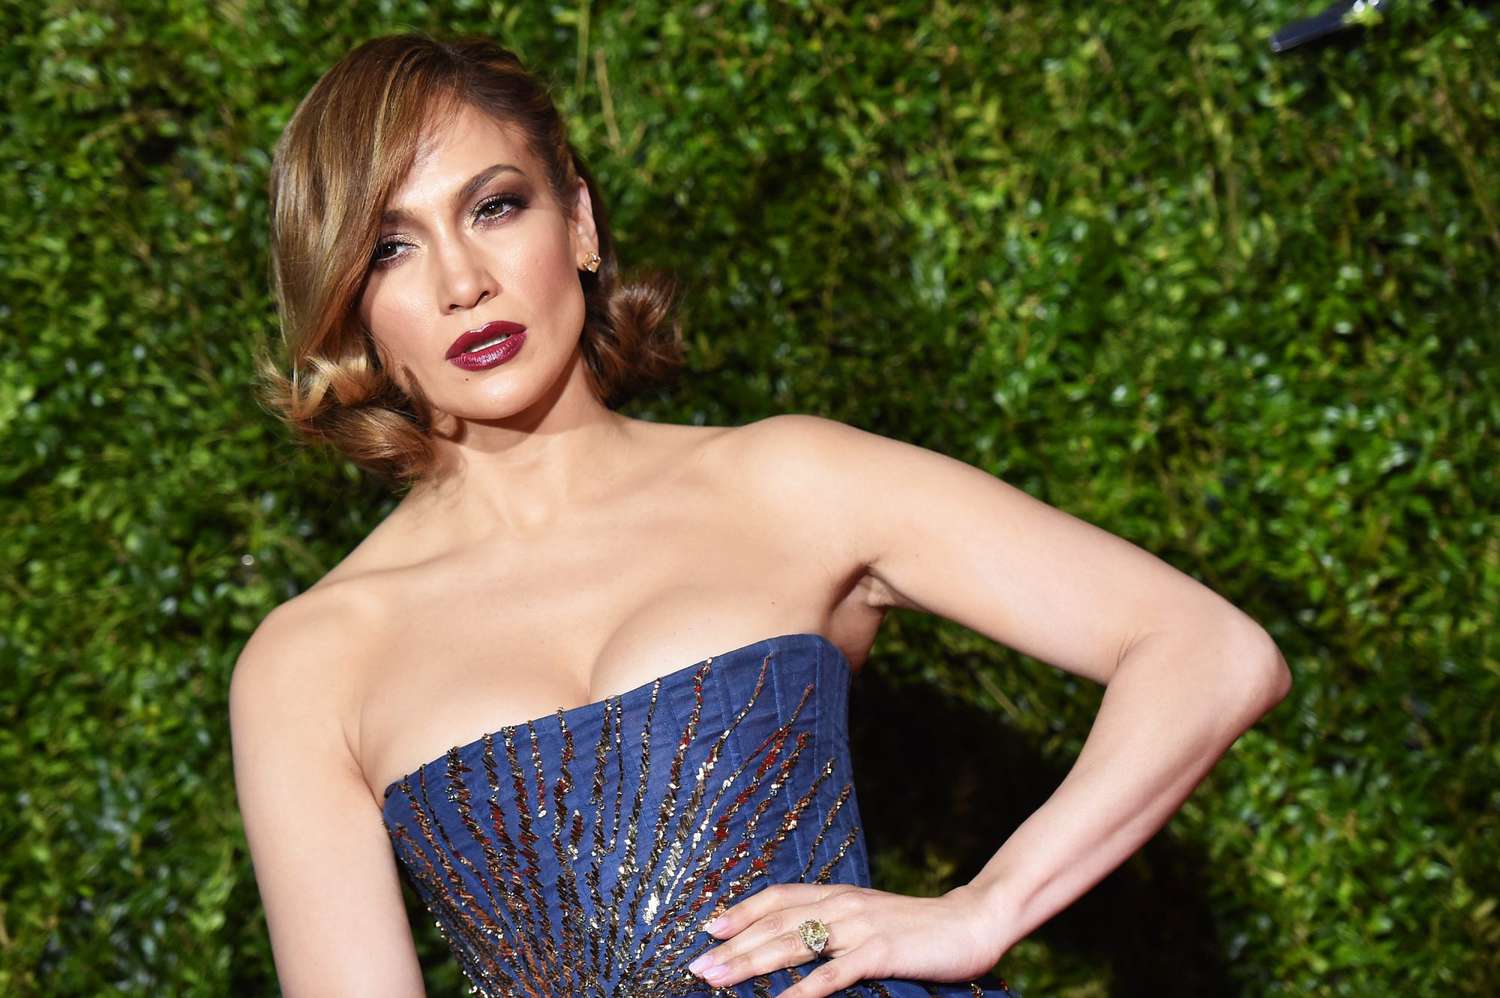 Jennifer Lopez attends the 2015 Tony Awards at Radio City Music Hall on June 7, 2015 in New York City